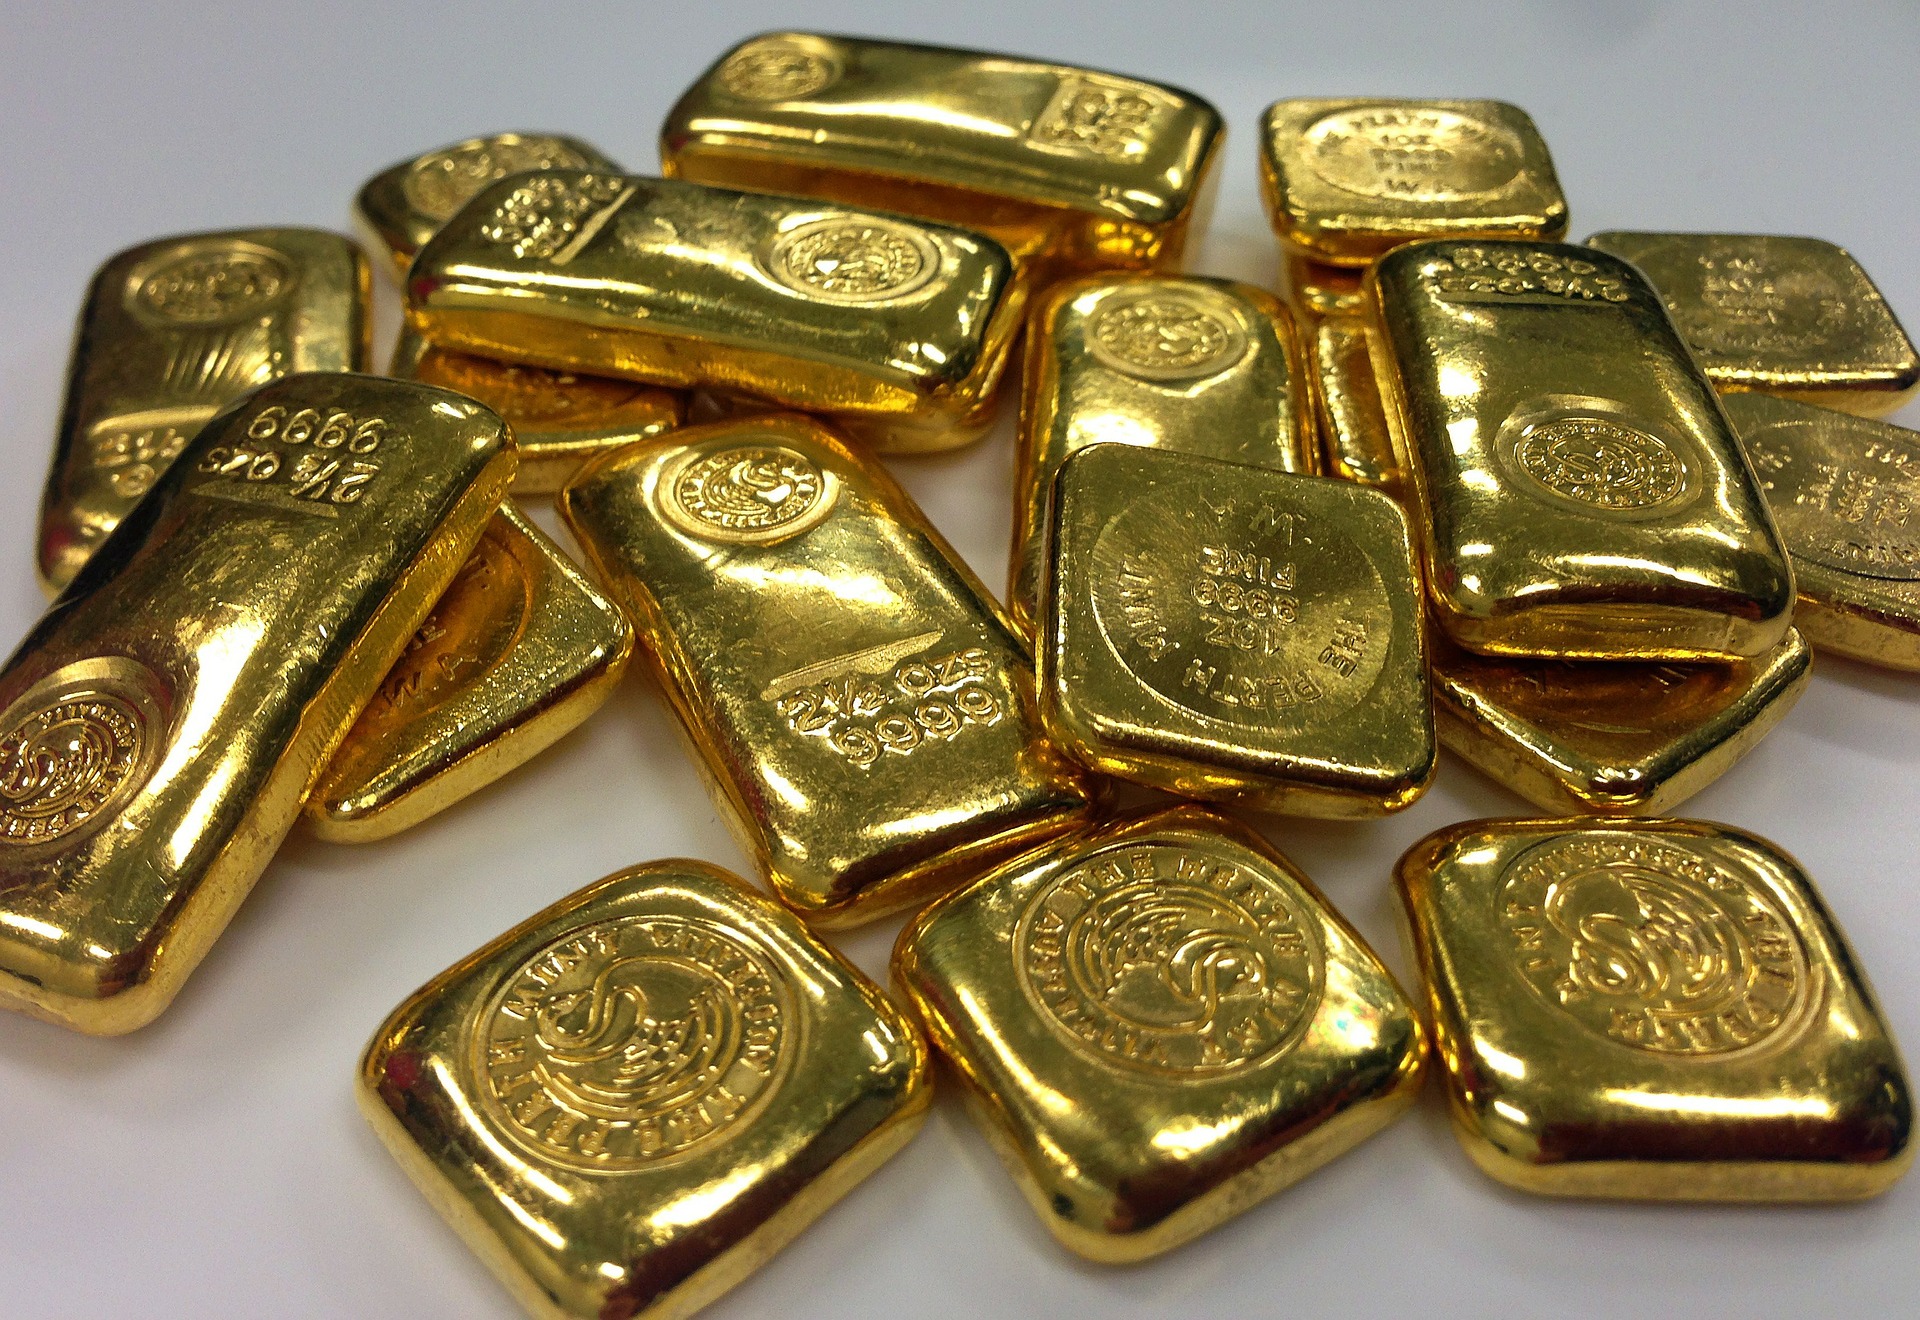 Royal Mint teams up with Quintet to launch recycled gold ETC